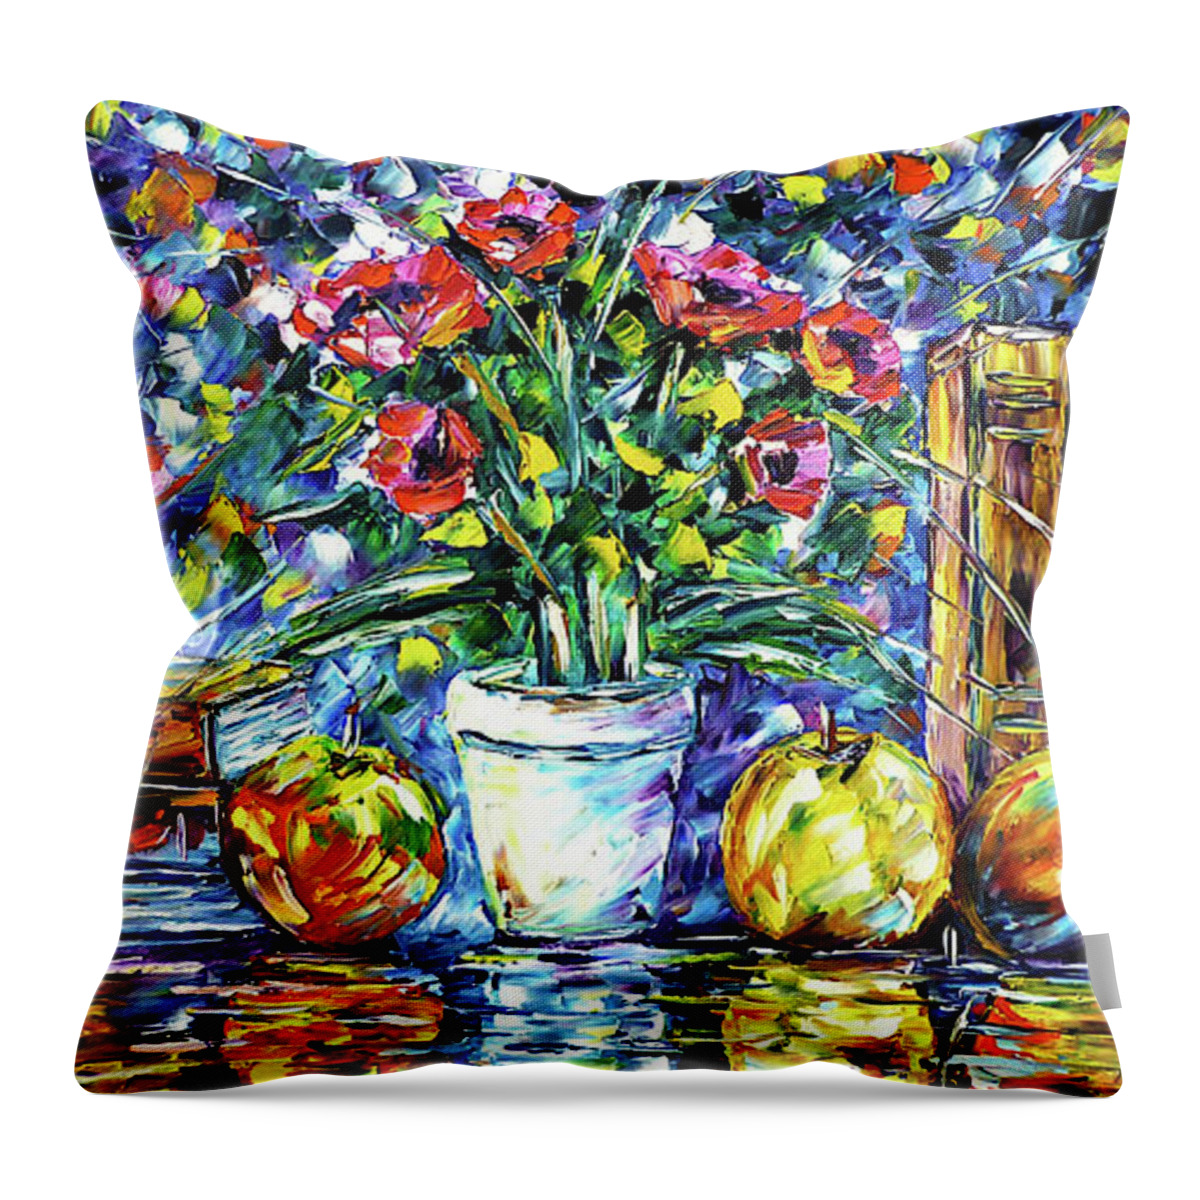 Horizontal Still Life Painting Throw Pillow featuring the painting Books, Flowers And Apples by Mirek Kuzniar